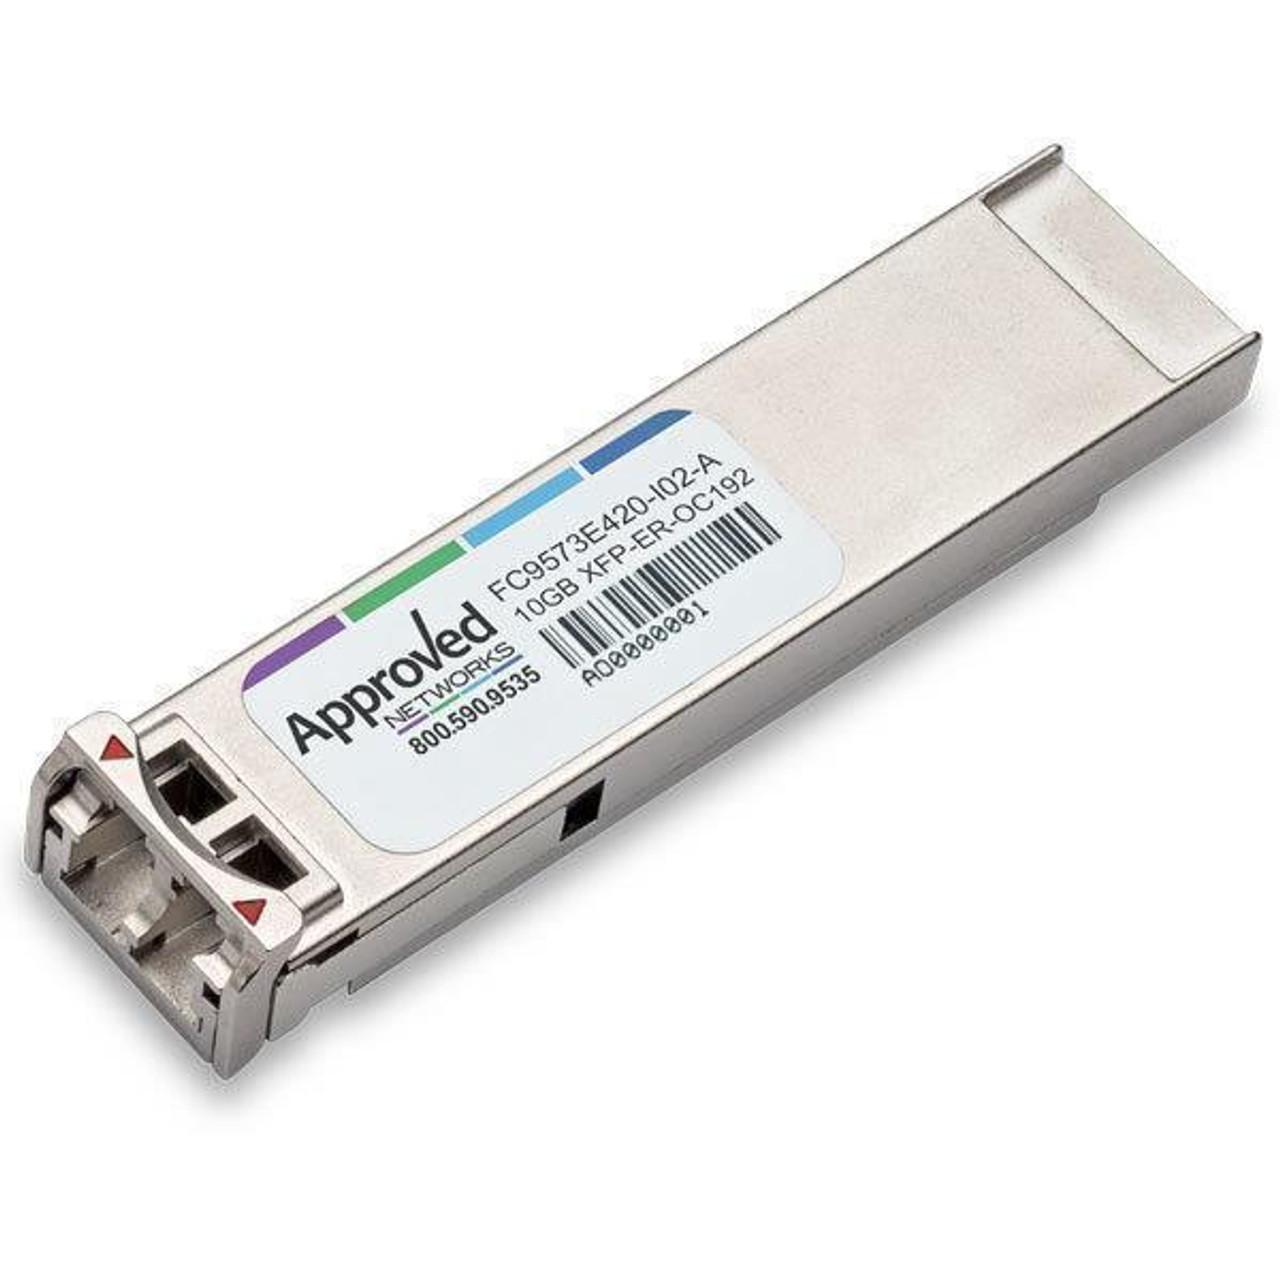 FC9573E420-I02 Fujitsu 10Gbps 10GBase Ethernet and OC-192/STM-64/10G Single-mode Fiber 40km 1550nm LC Connector XFP Transceiver Module